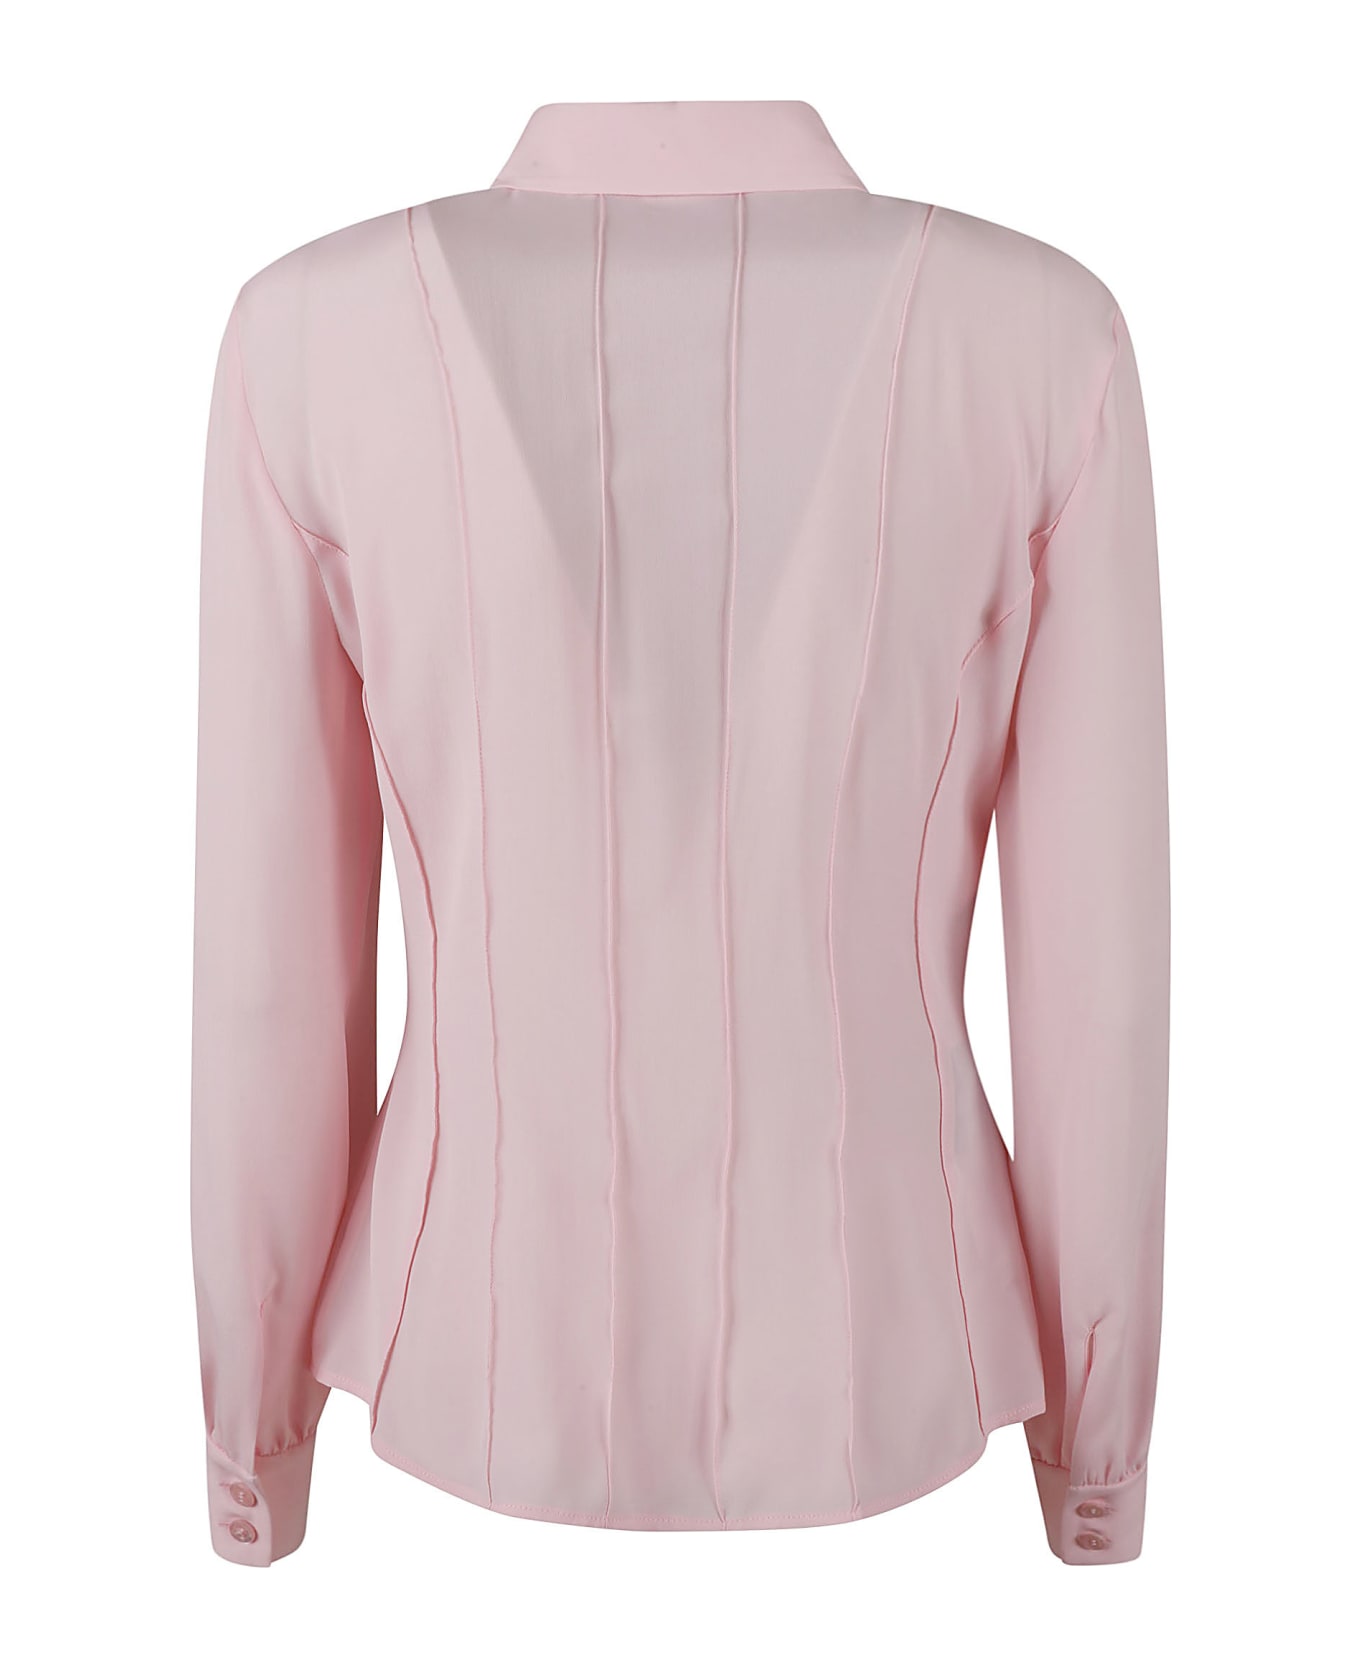 Boutique Moschino Pleated Shirt - Pink シャツ